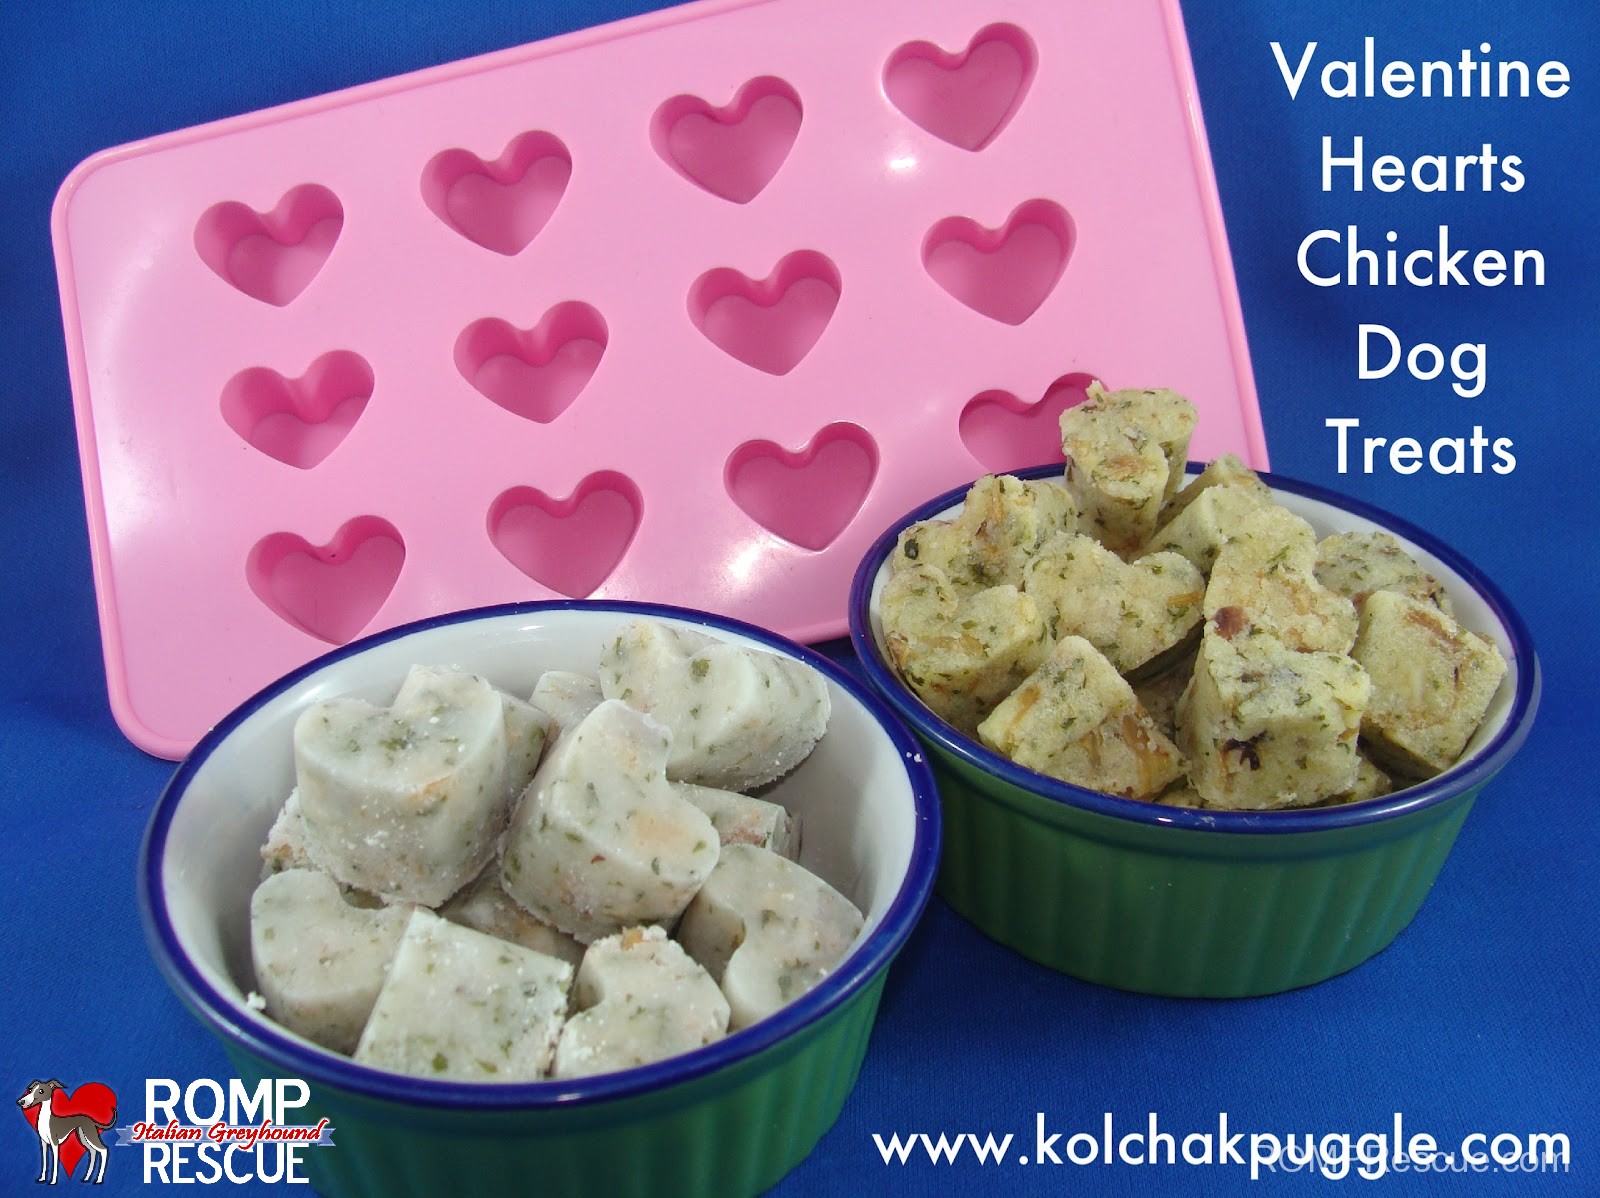 DIY Dog Valentine's Day, DIY, do it yourself, chicken treats, dog chicken, dog chicken treats, dog treats, valentines day, vday, v-day, hot, cold, do it yourself, recipe, ingredients, easy, simple, yummy, healthy, good, delicious, dog, pup, pet, dogs, pets, pups, pooch, pooches